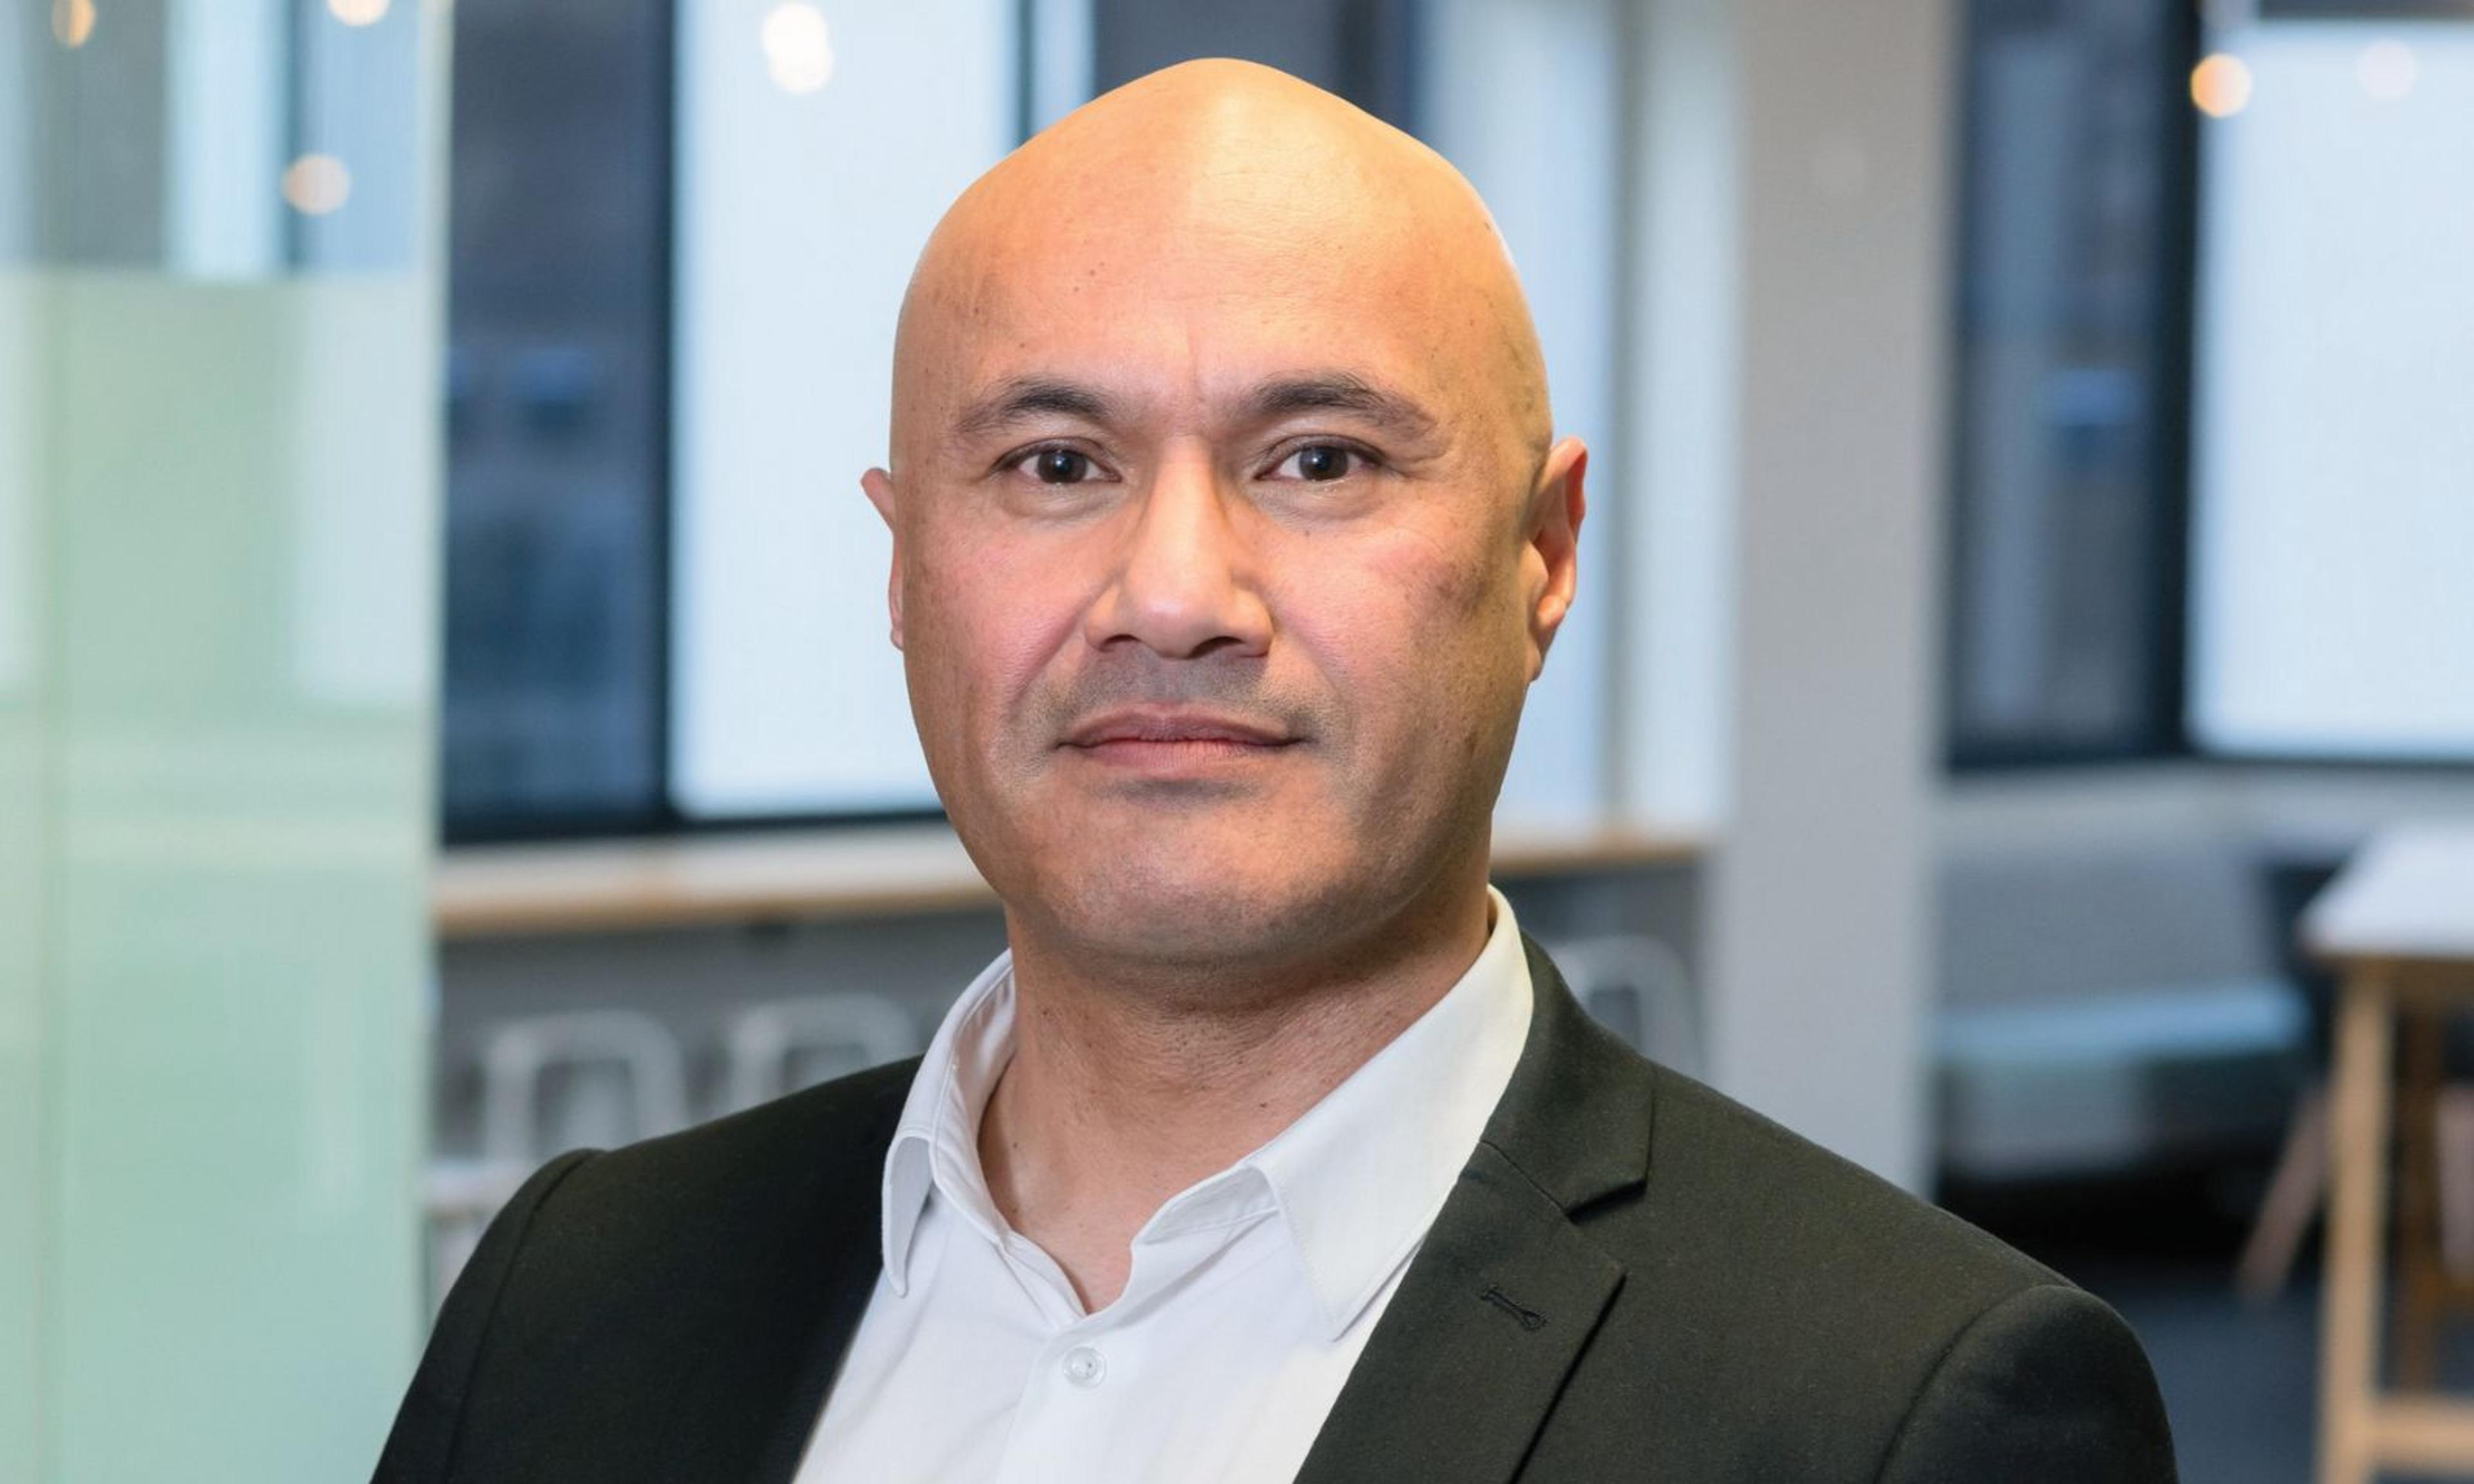 Associate Commissioner at the Commerce Commission Joseph Liava'a is encouraging Pacific people to be safer consumers.